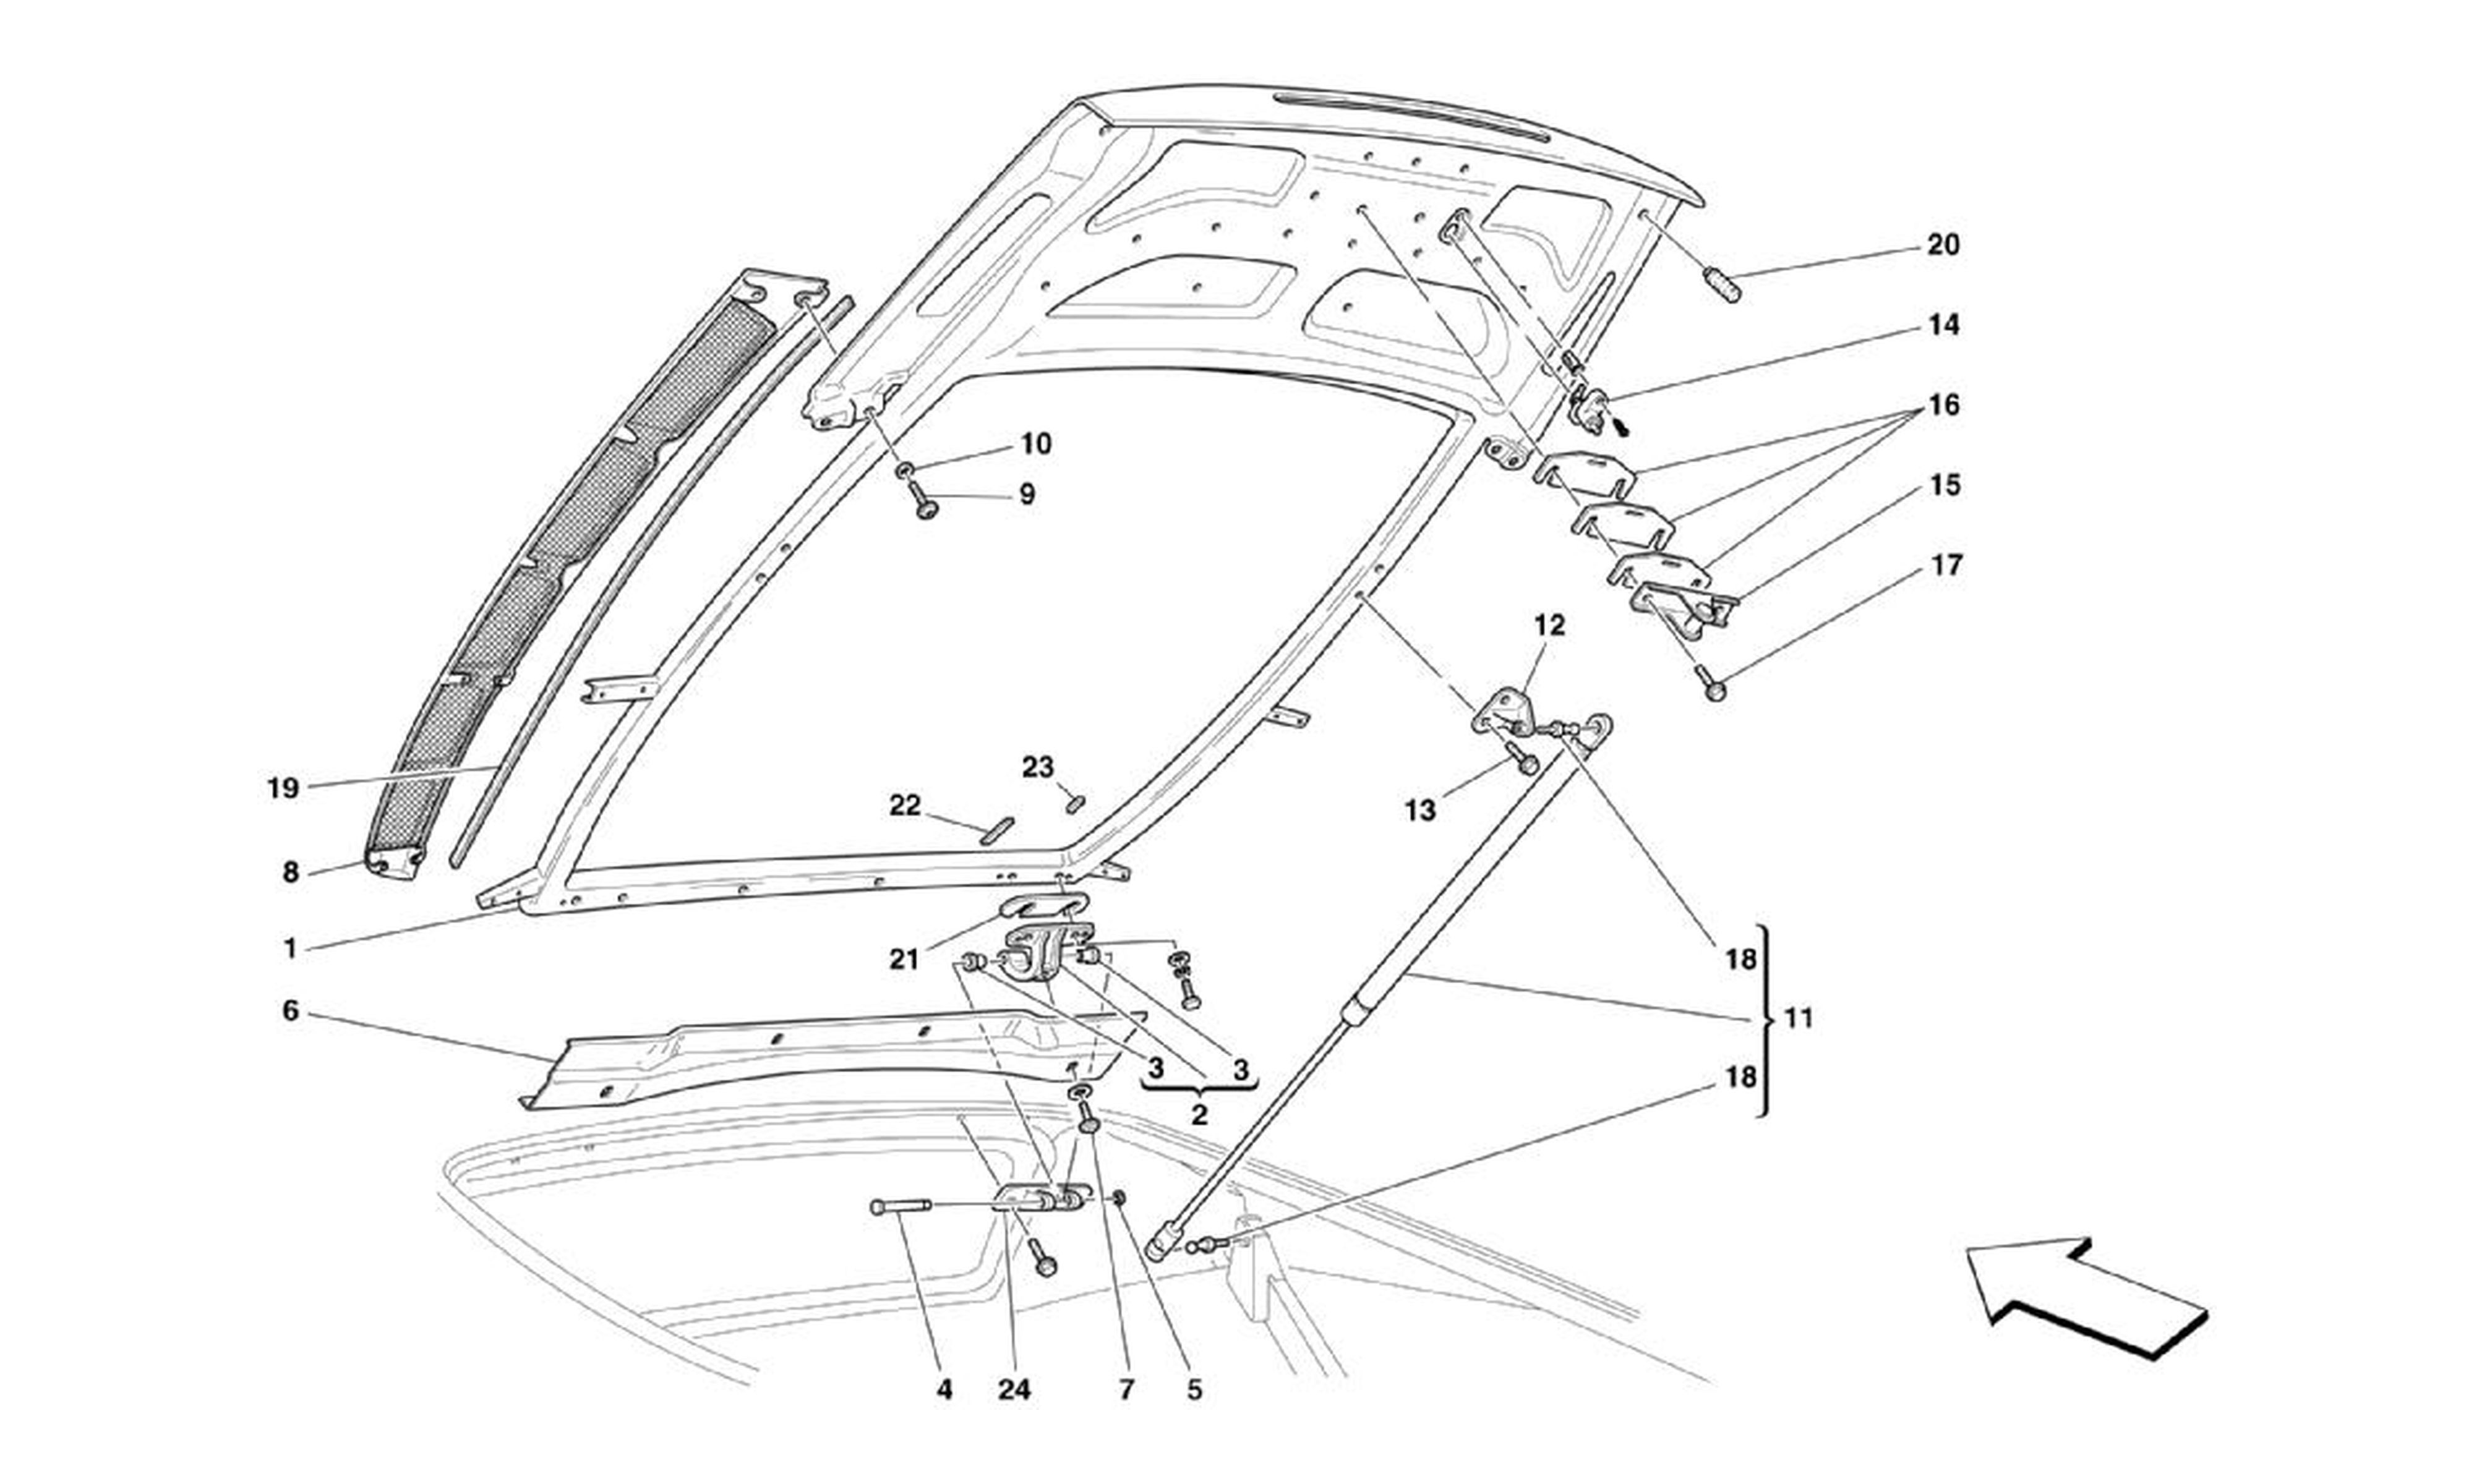 Schematic: Engine Compartment Lid